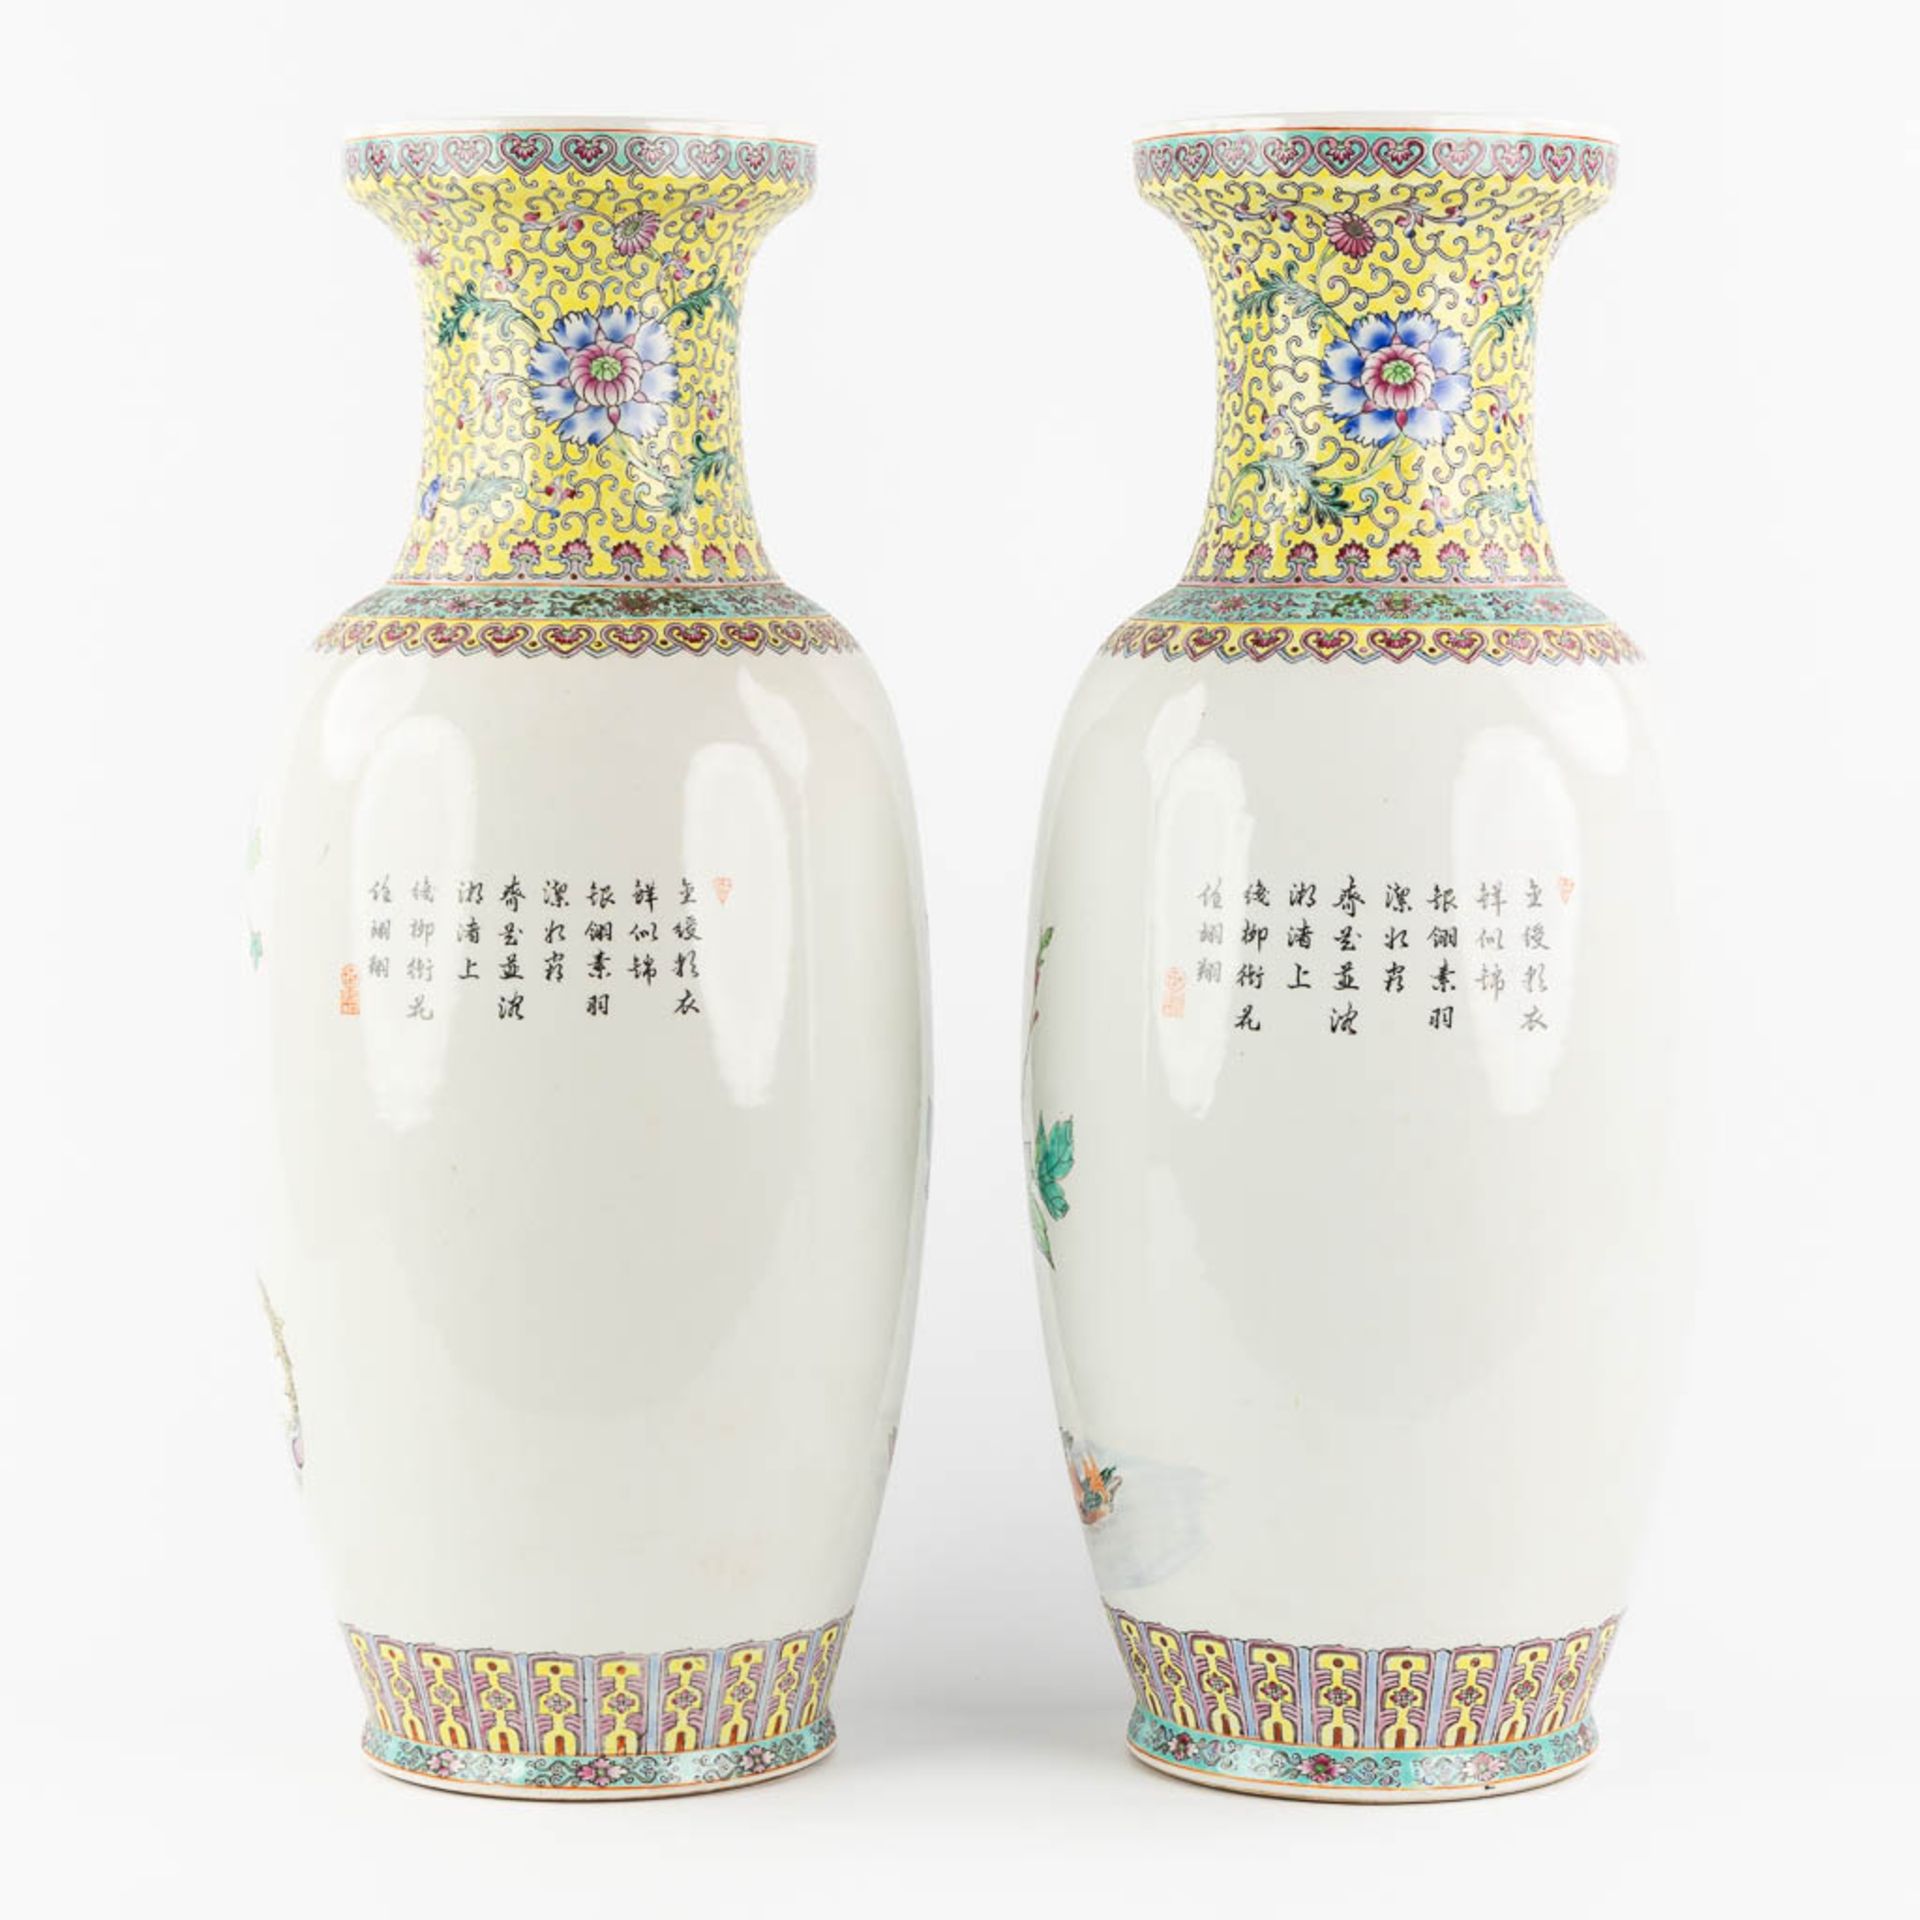 A decorative pair of Chinese vases with a Phoenix decor, 20th C. (H:62 x D:26 cm) - Image 5 of 16